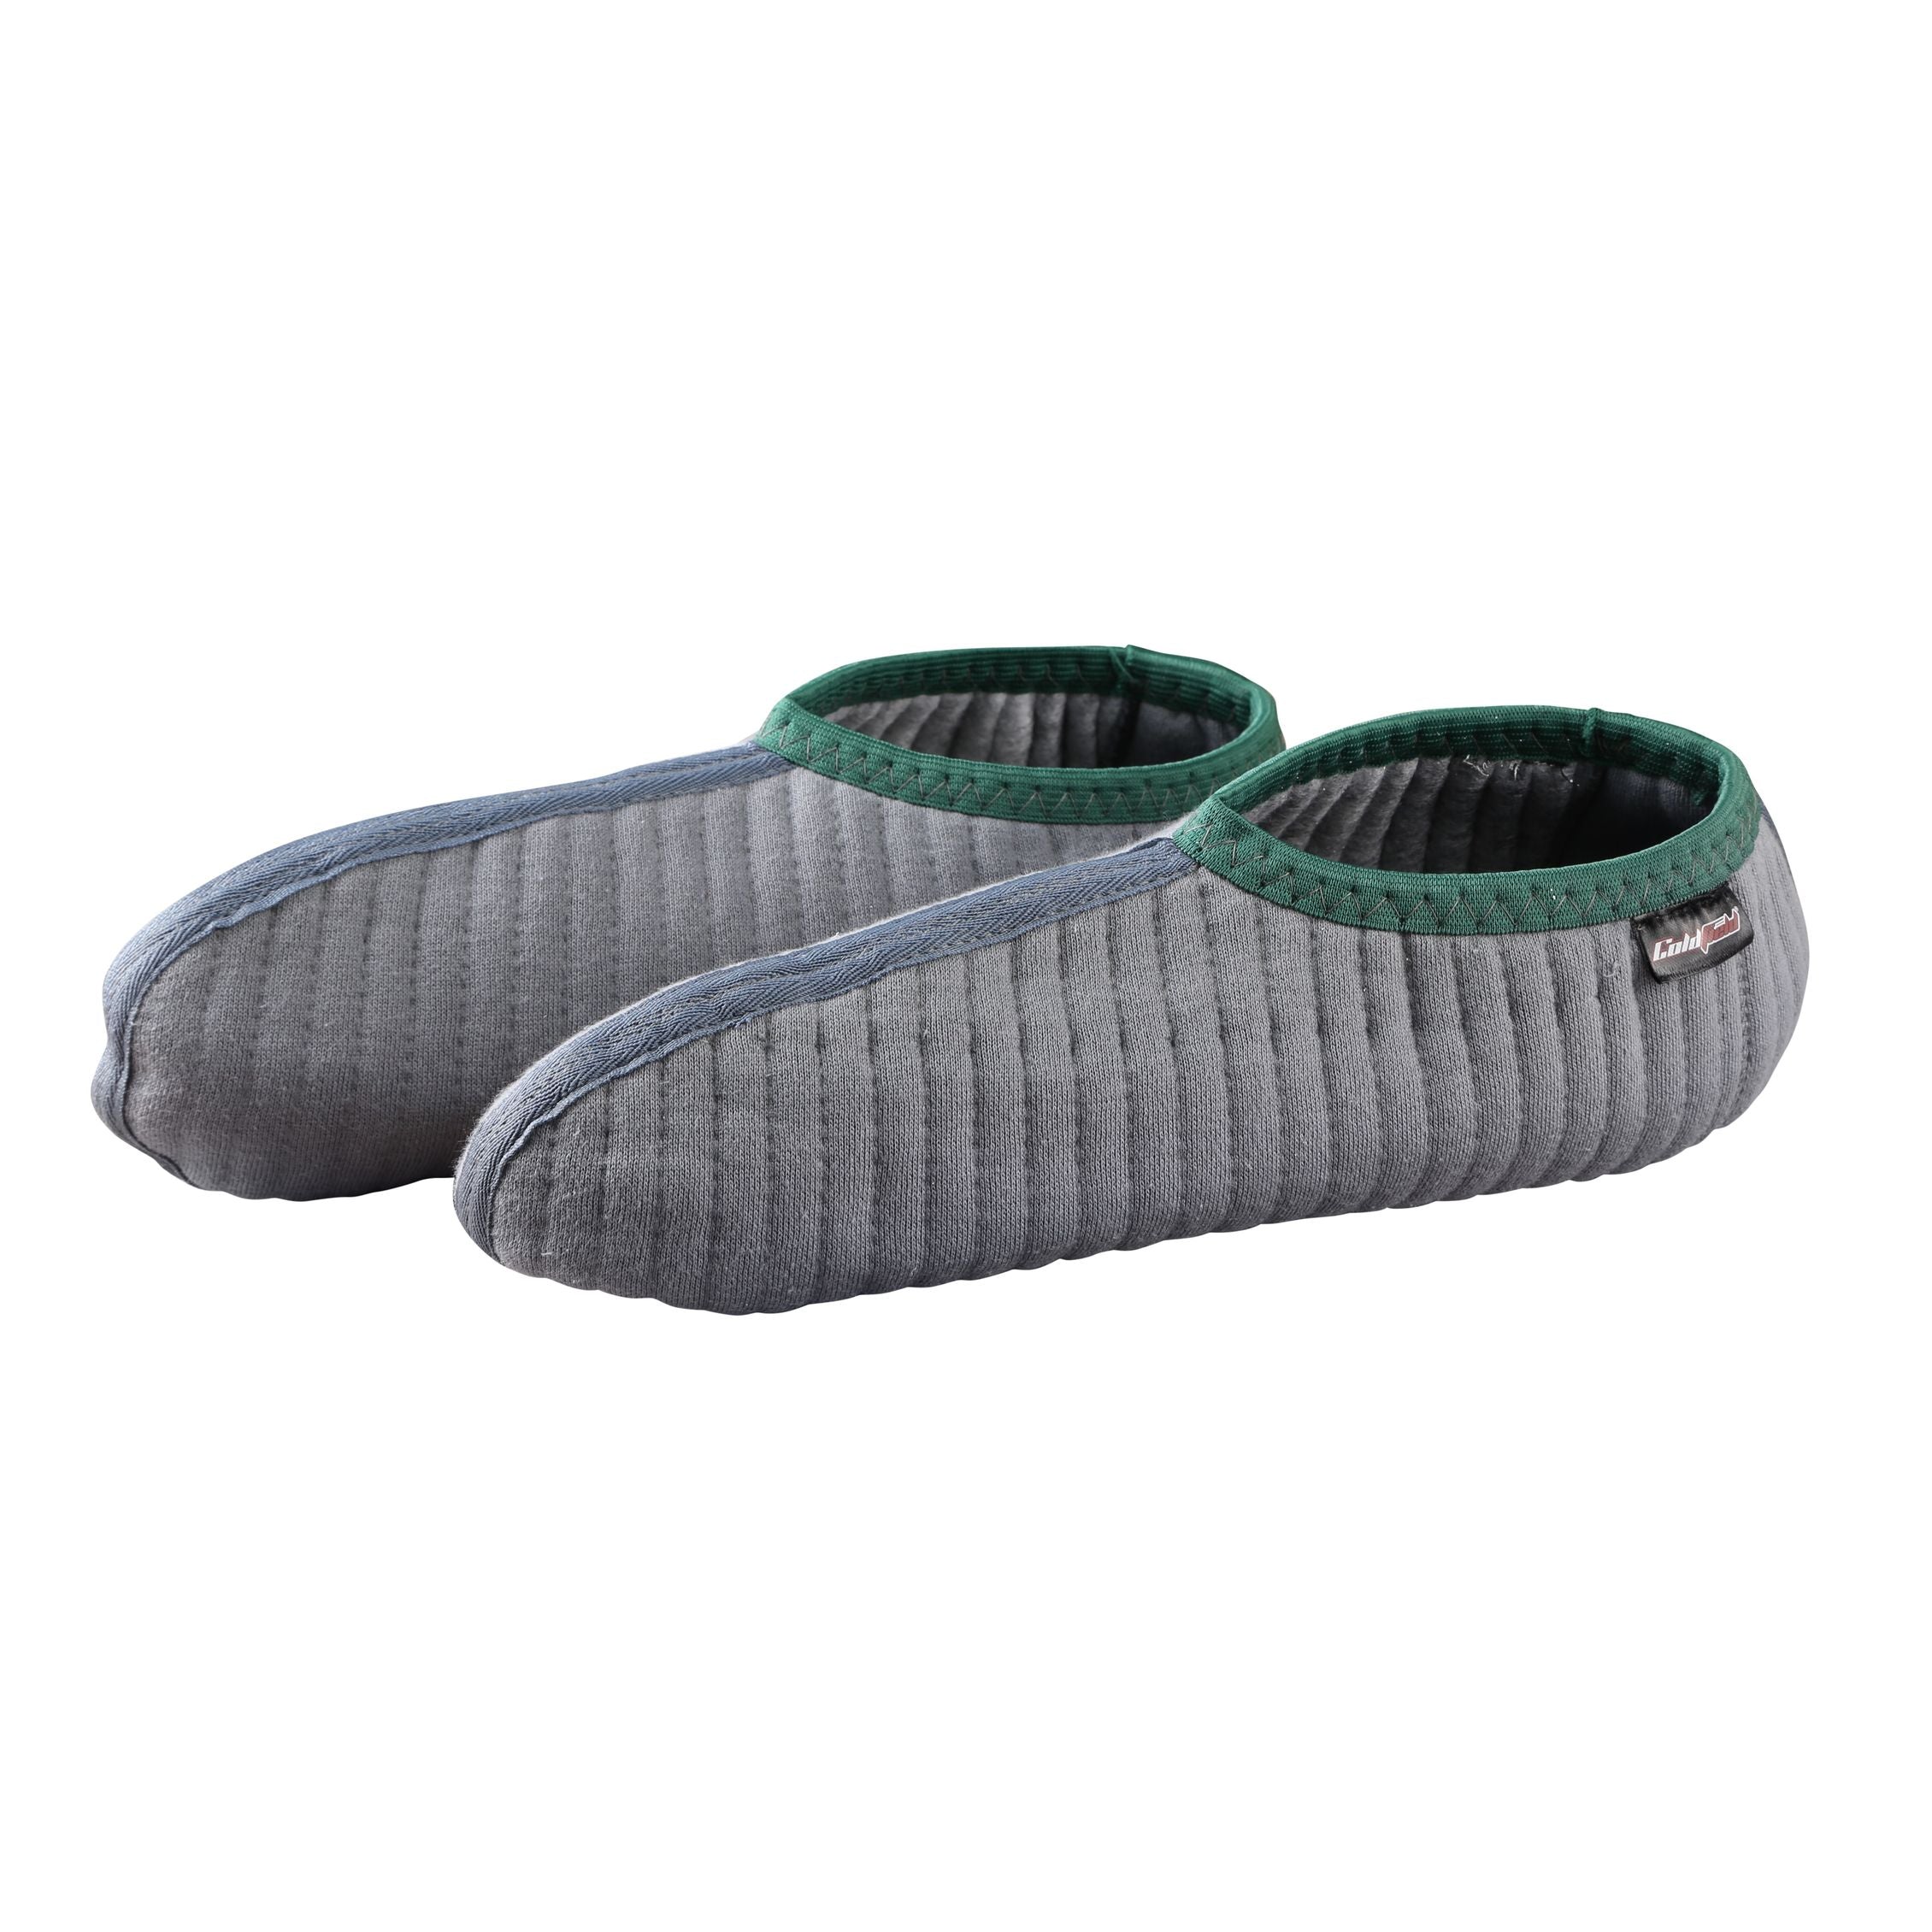 Insulated slippers - Men's